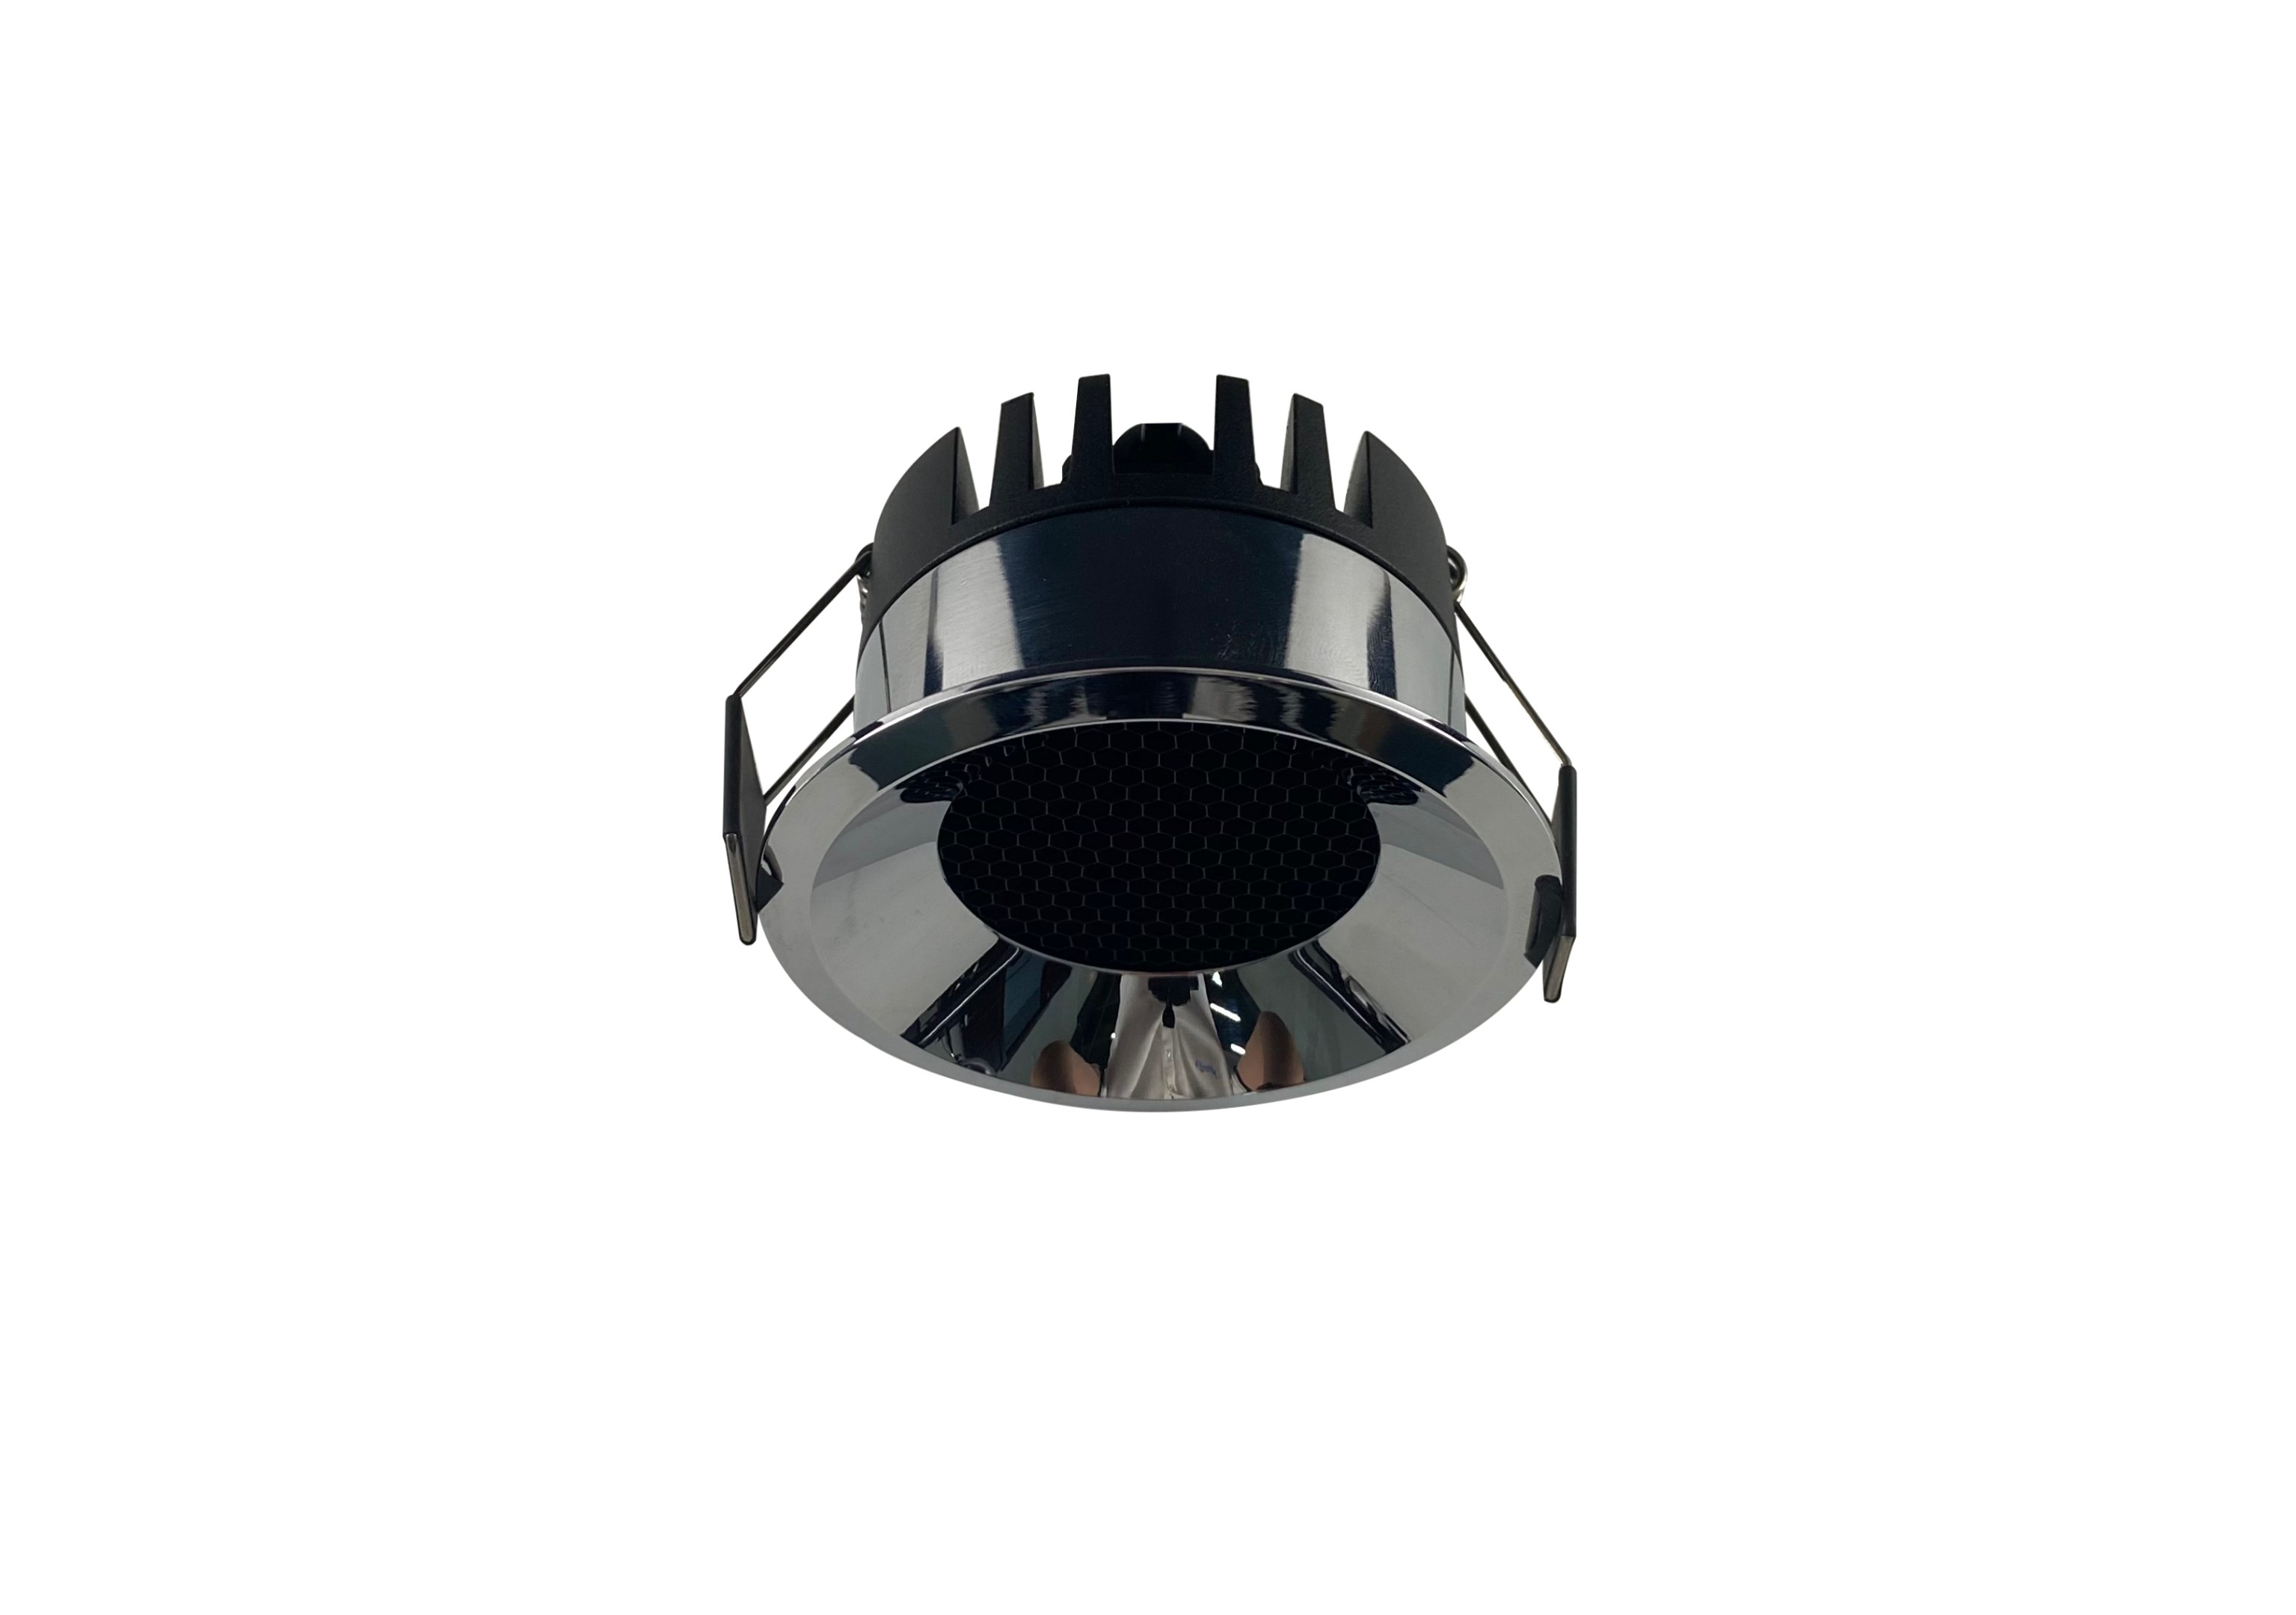 Our LED spotlights are energy-efficient with superior heat dissipation due to aluminum construction, high luminosity, and customizable appearance options.